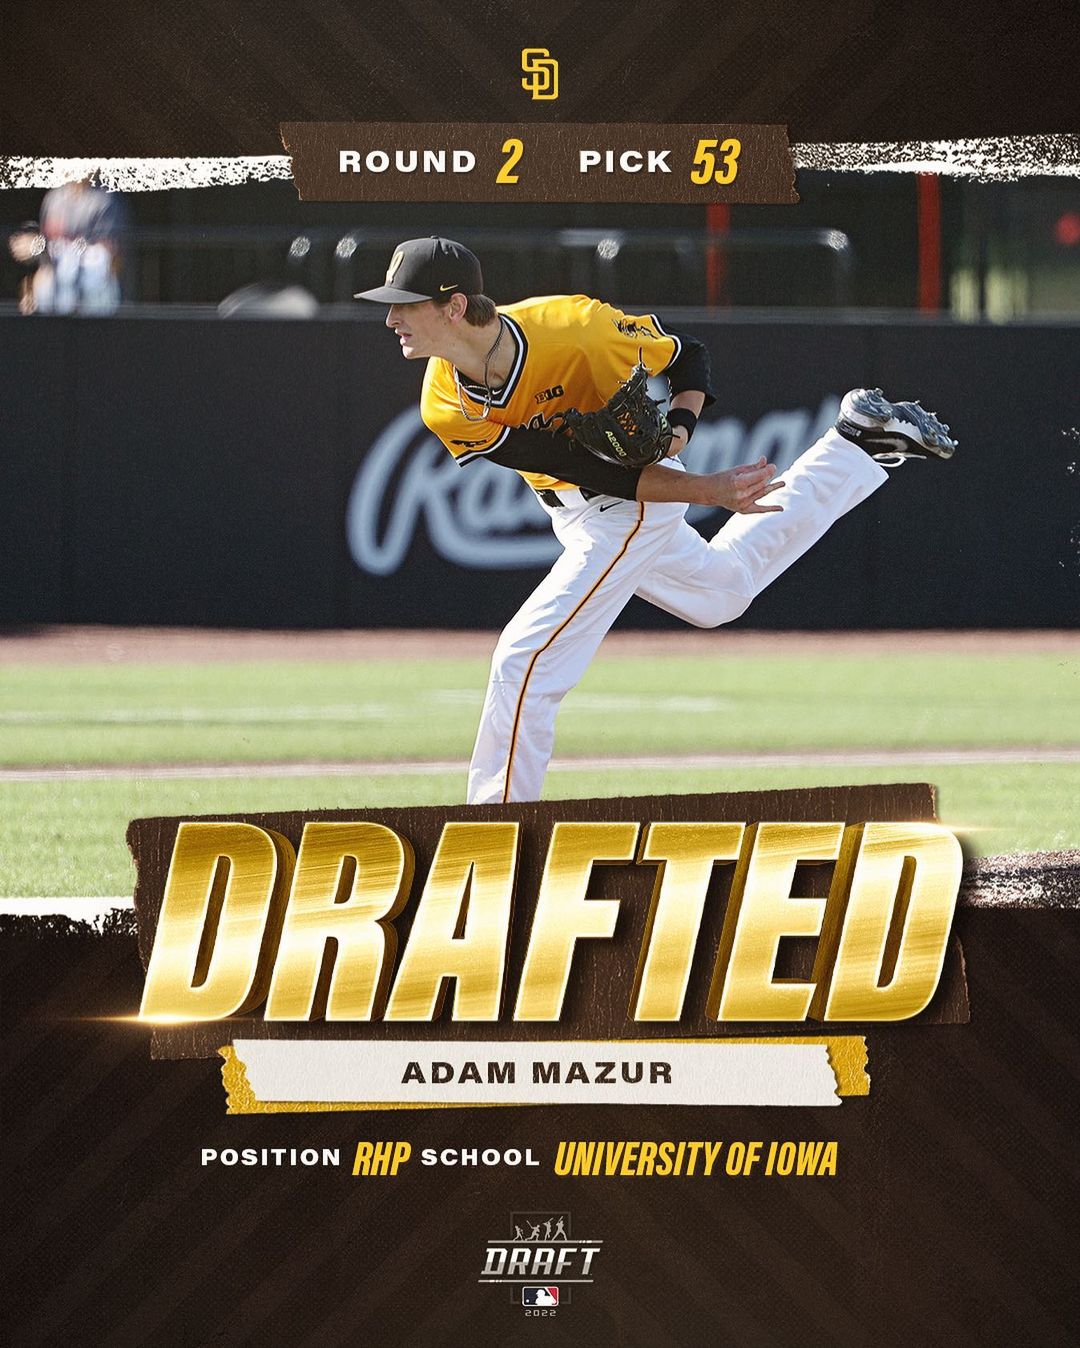 With the 53rd pick in the 2022 #MLBDraft, the Padres have selected Adam Mazur fr...